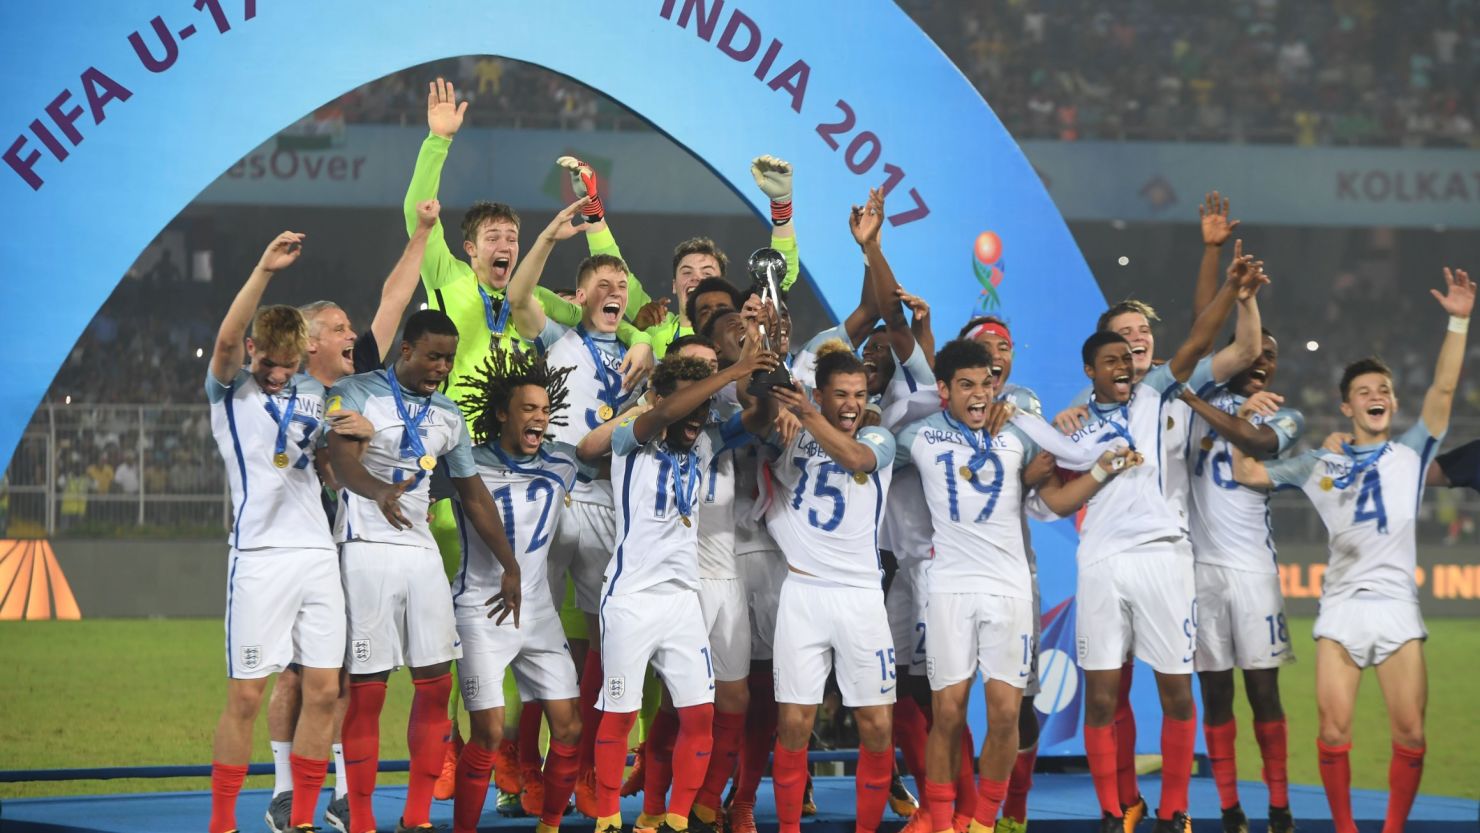 England lift their trophy after winning the Under-17 World Cup final.